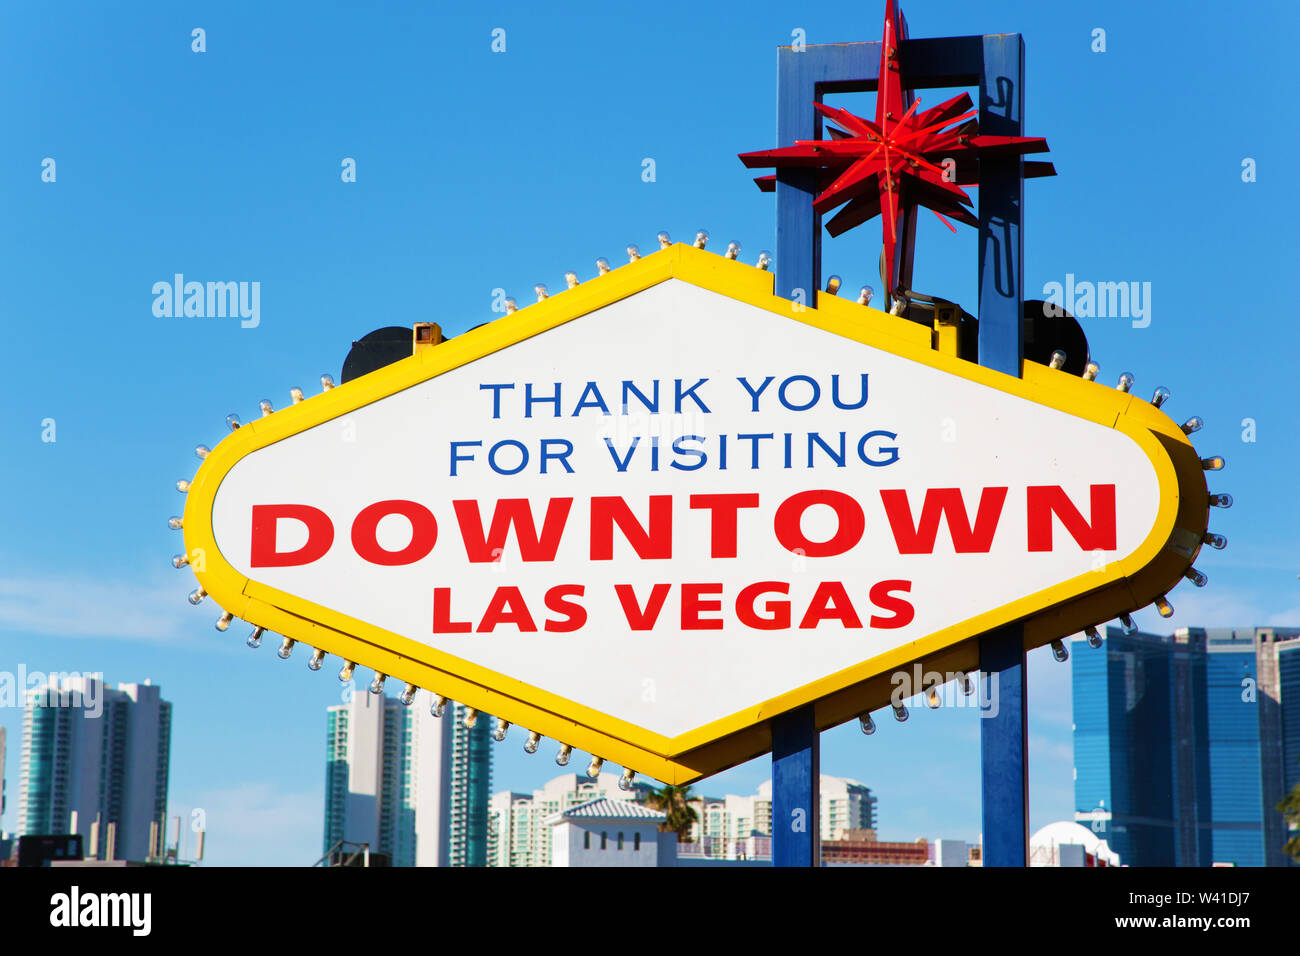 Thank you for visiting downtown Las Vegas sign Stock Photo